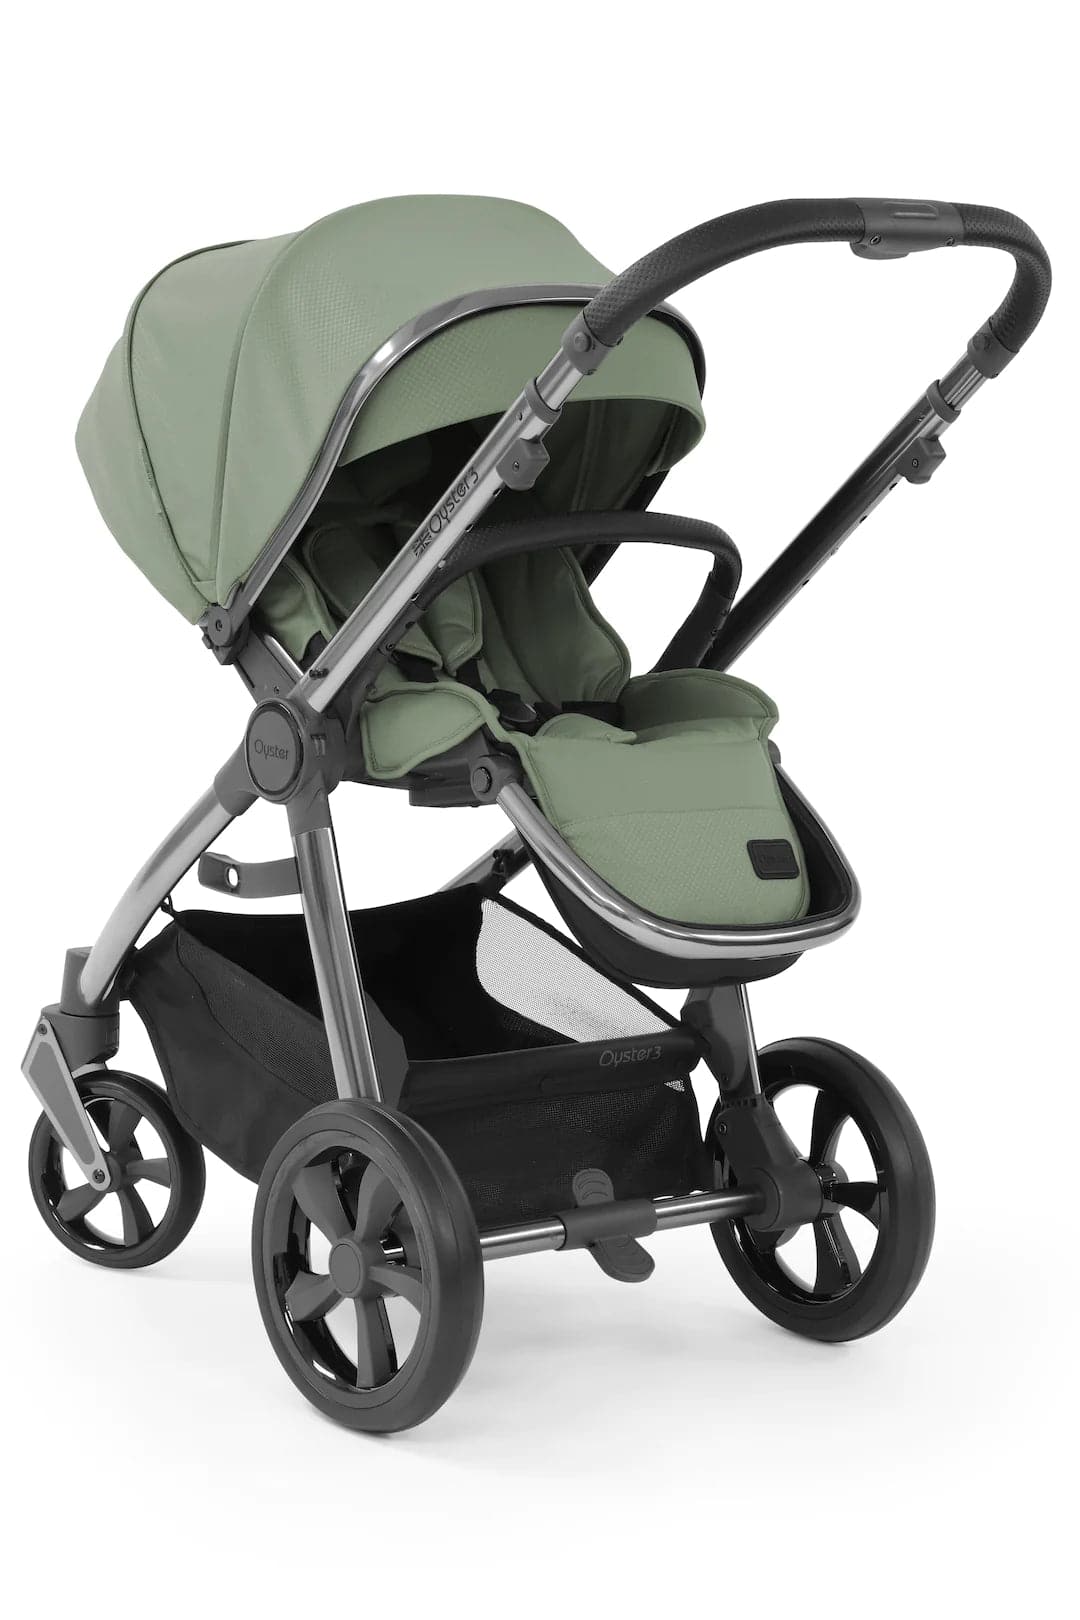 BabyStyle Oyster 3 Pushchair - Spearmint - For Your Little One